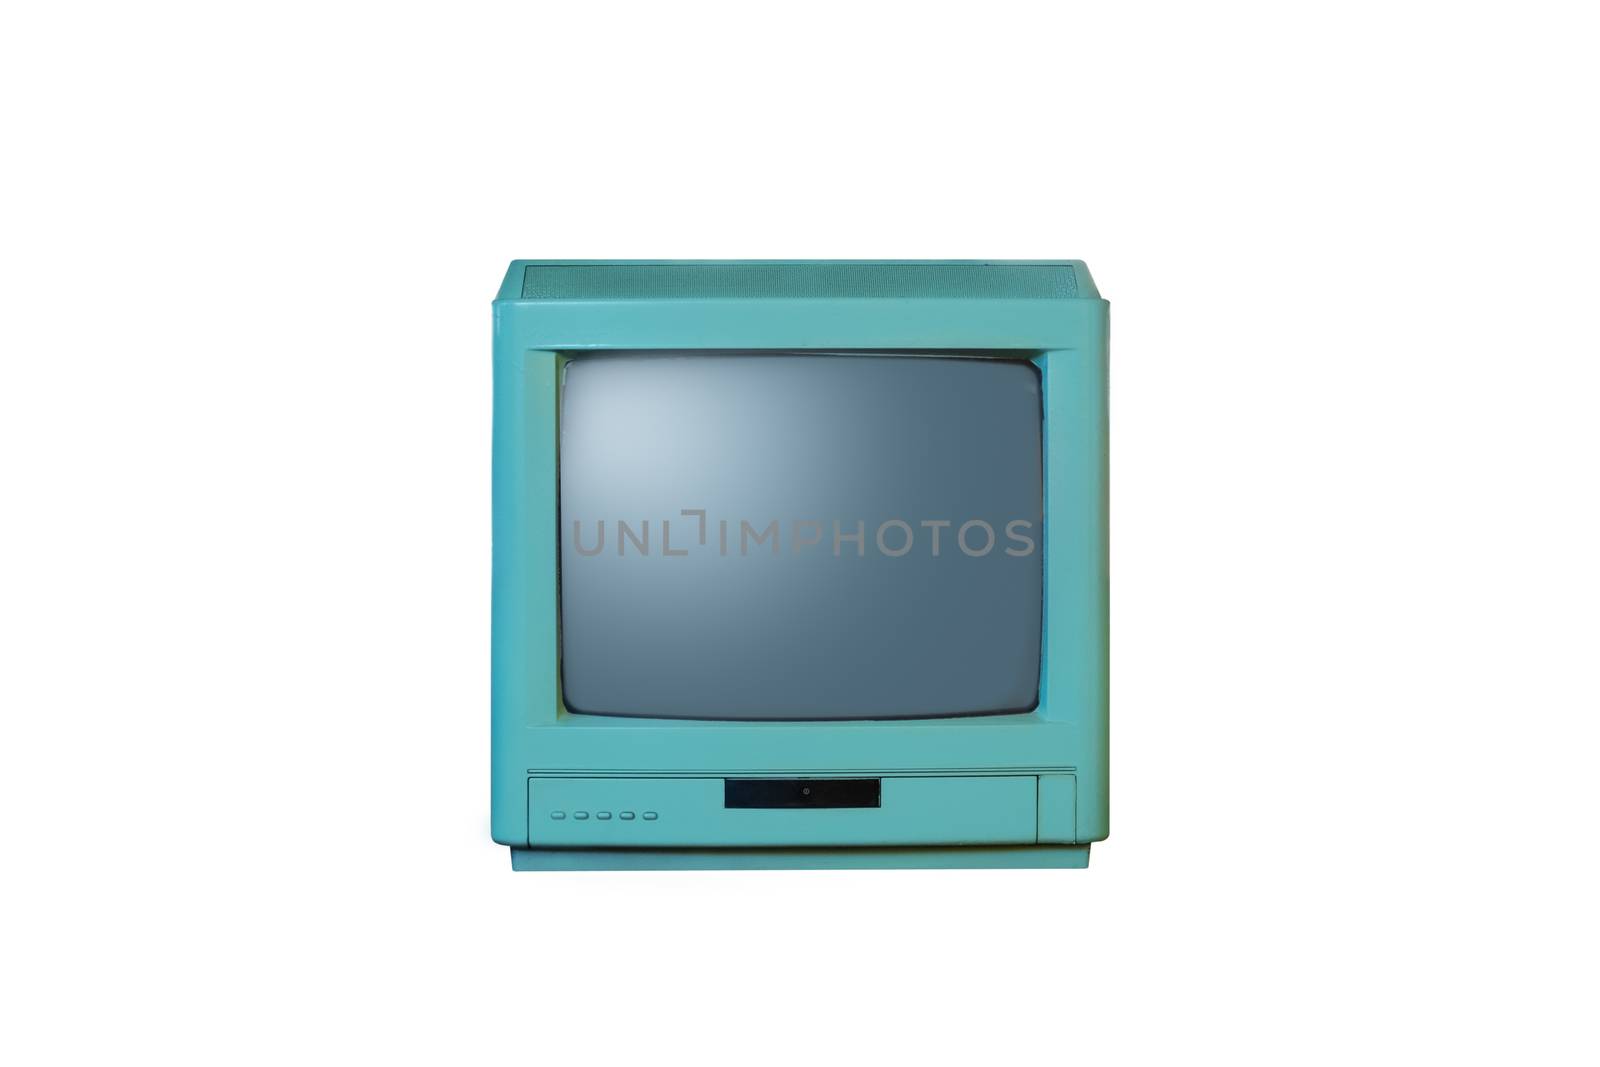 Retro old blue television from 80s isolated on white background.